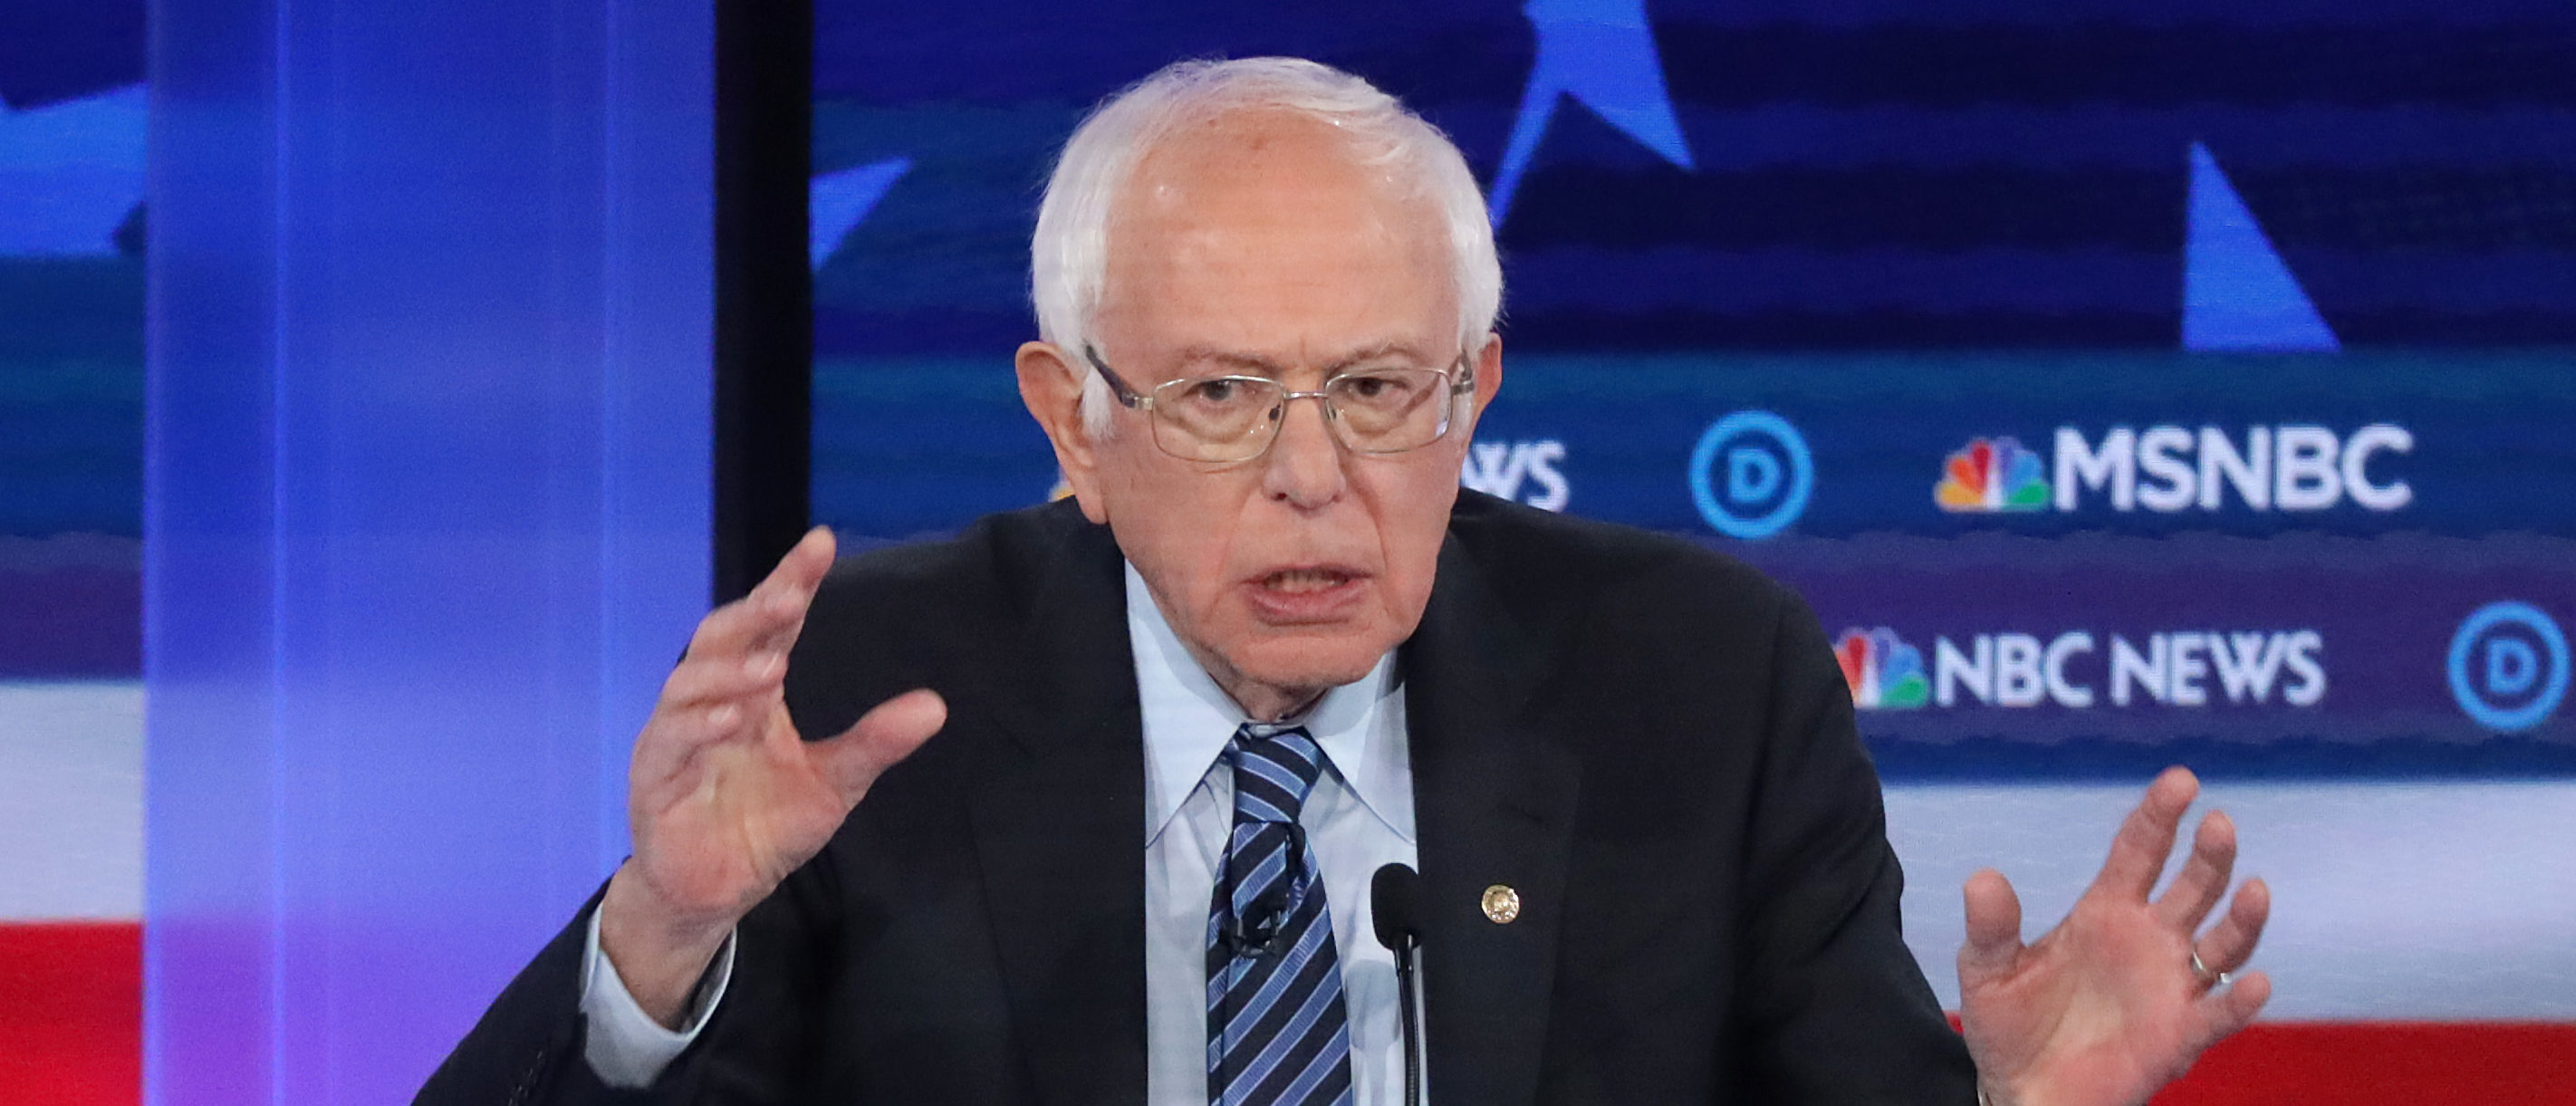 Bernie Sanders Endorses ‘Young Turks’ Host Who Called For Legalizing Bestiality